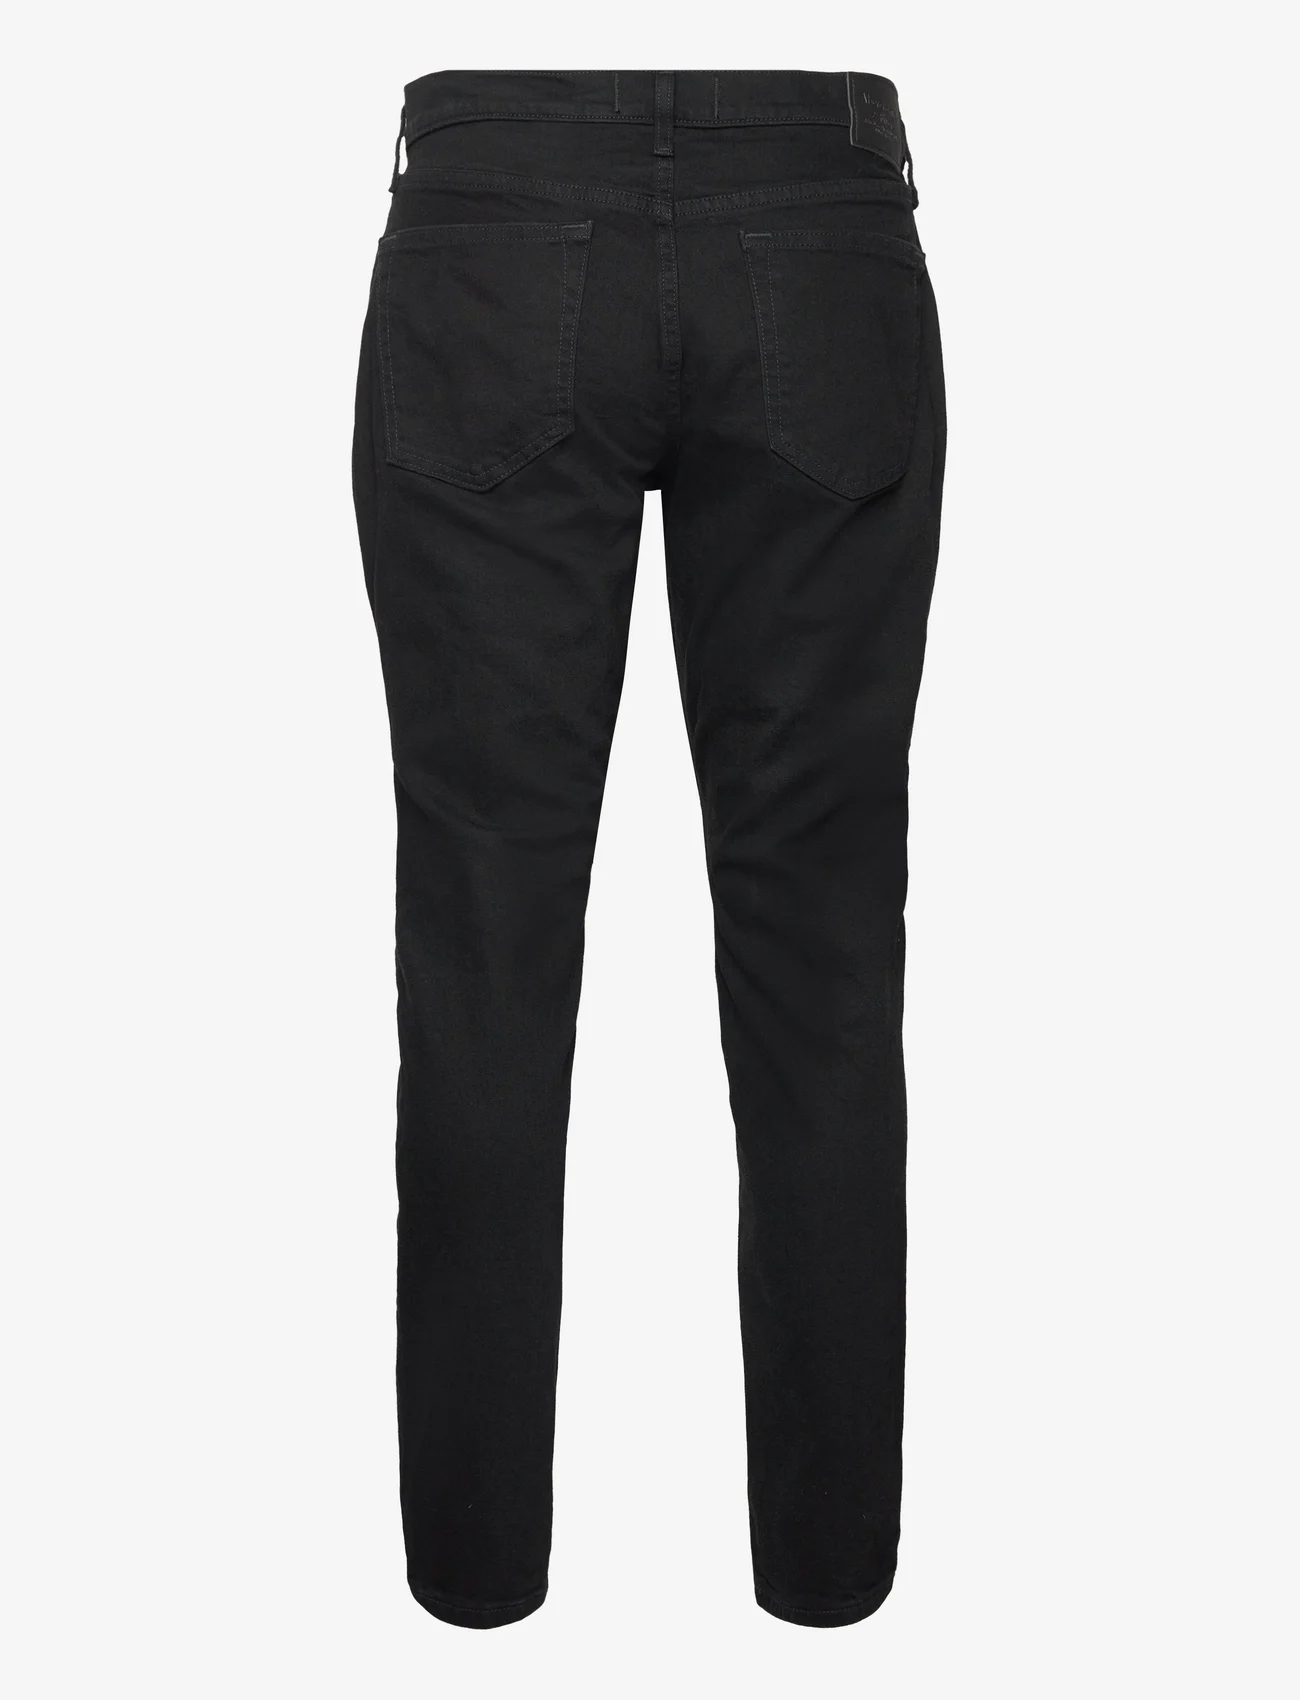 Abercrombie & Fitch - ANF MENS JEANS - slim fit jeans - ablack196 - saturated black wash - 1